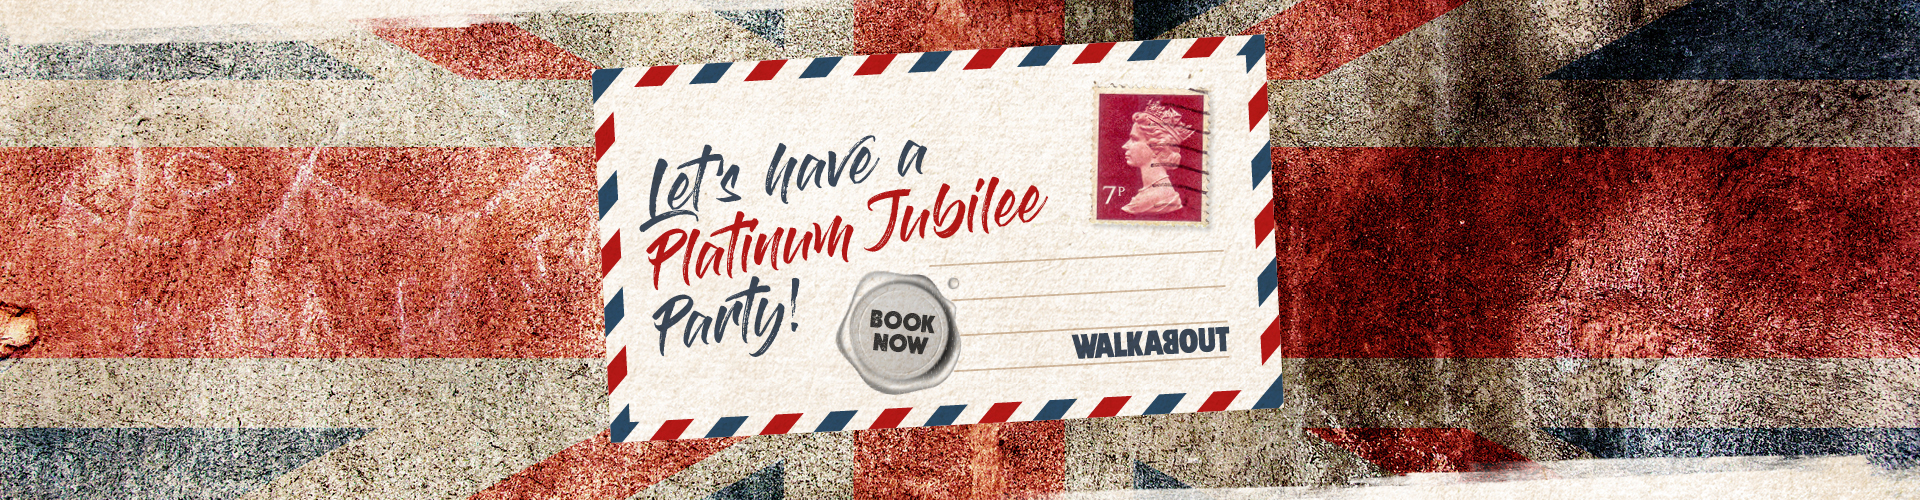 Let's have a Platinum Jubilee party! Book Now